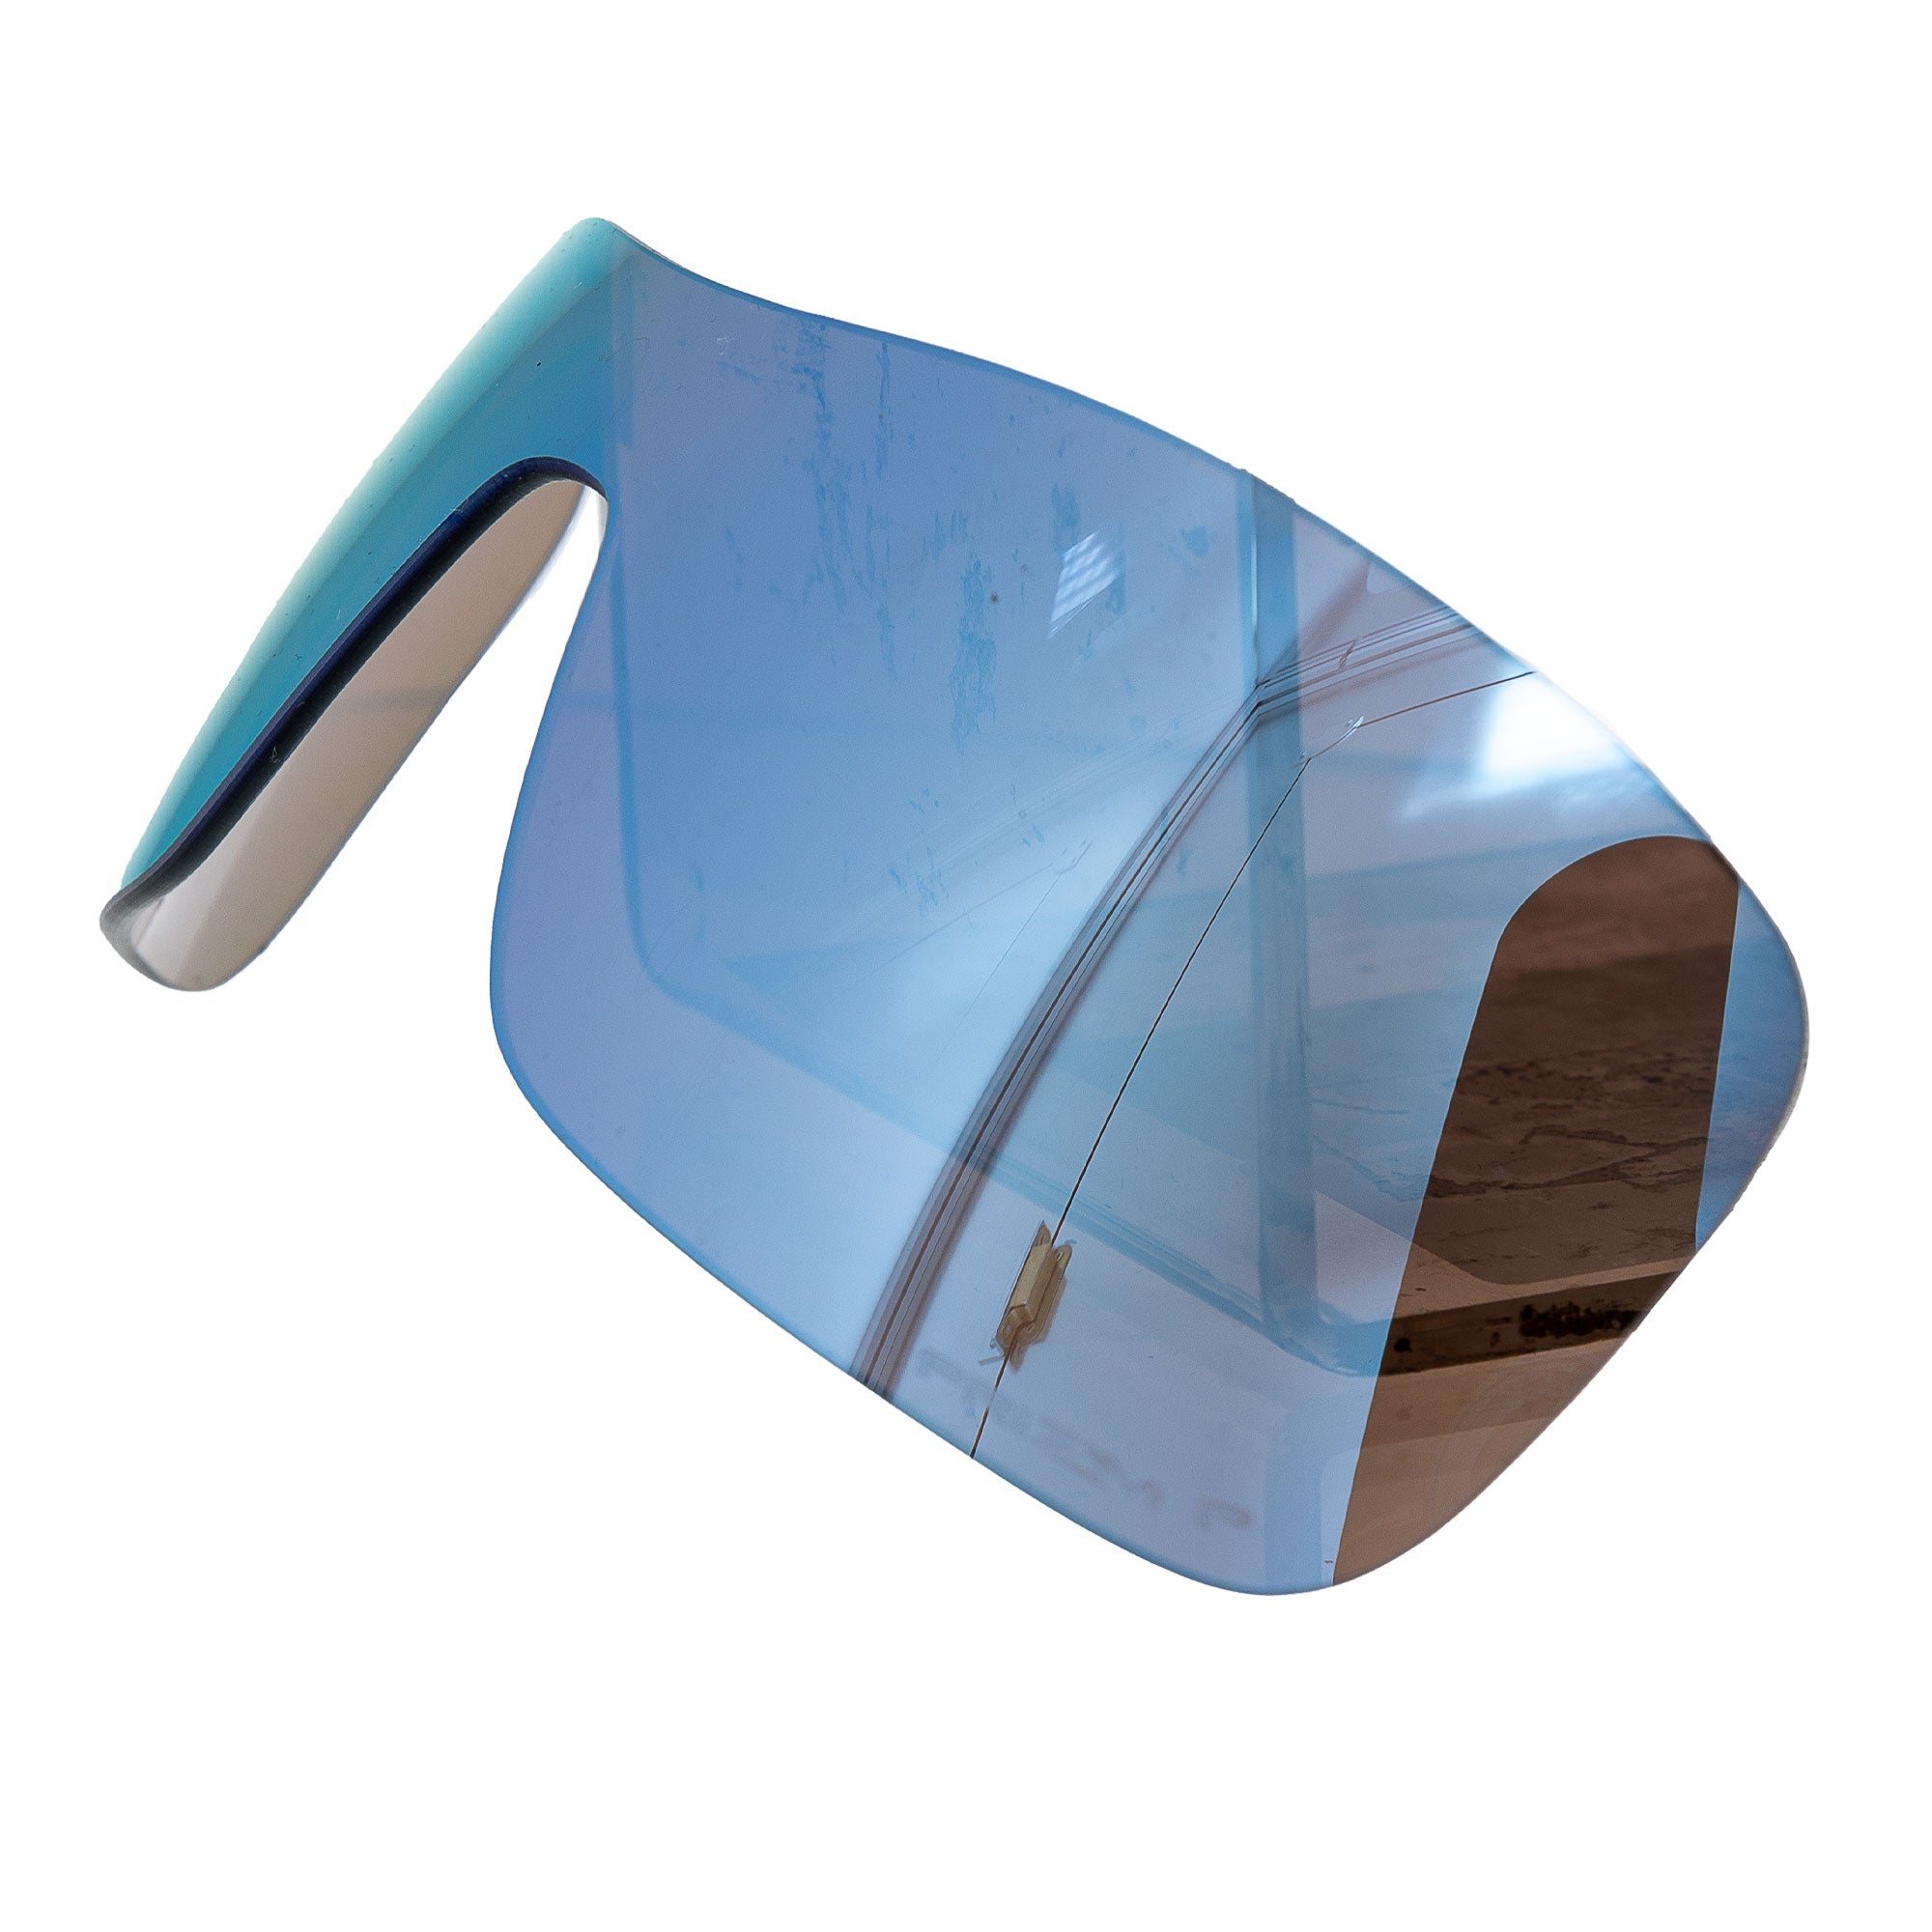 Oakley 102-192-025 Turbine Rotor OO9307 Sunglasses Replacement Lens Deep Water Polarized